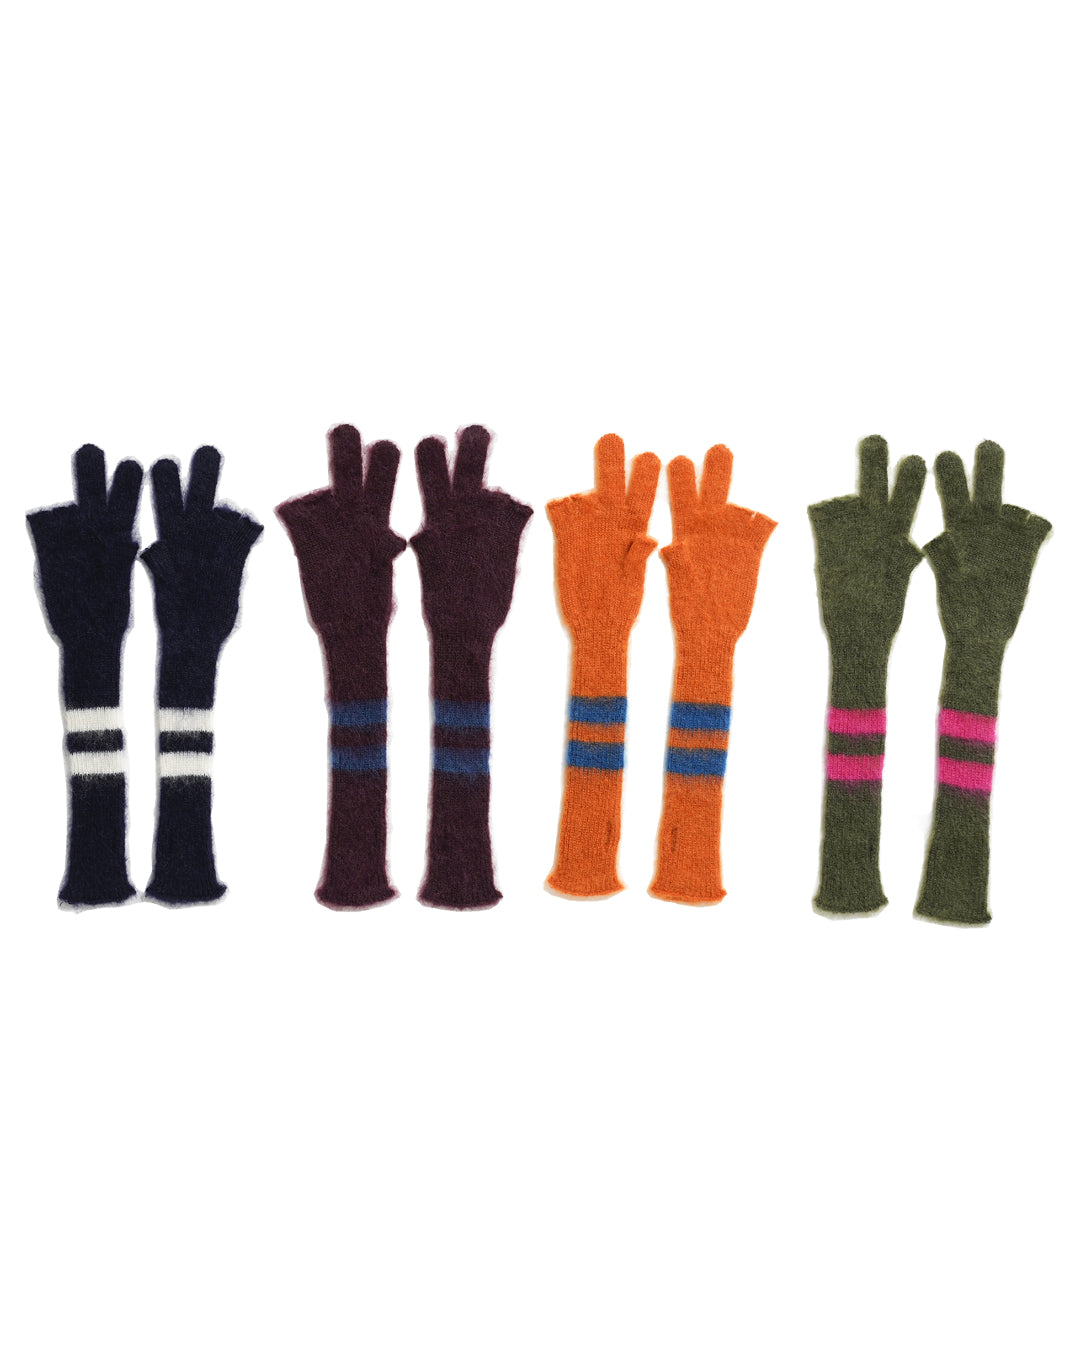 PEACE MOHAIR GLOVES (4COLORS) - Baby's all right